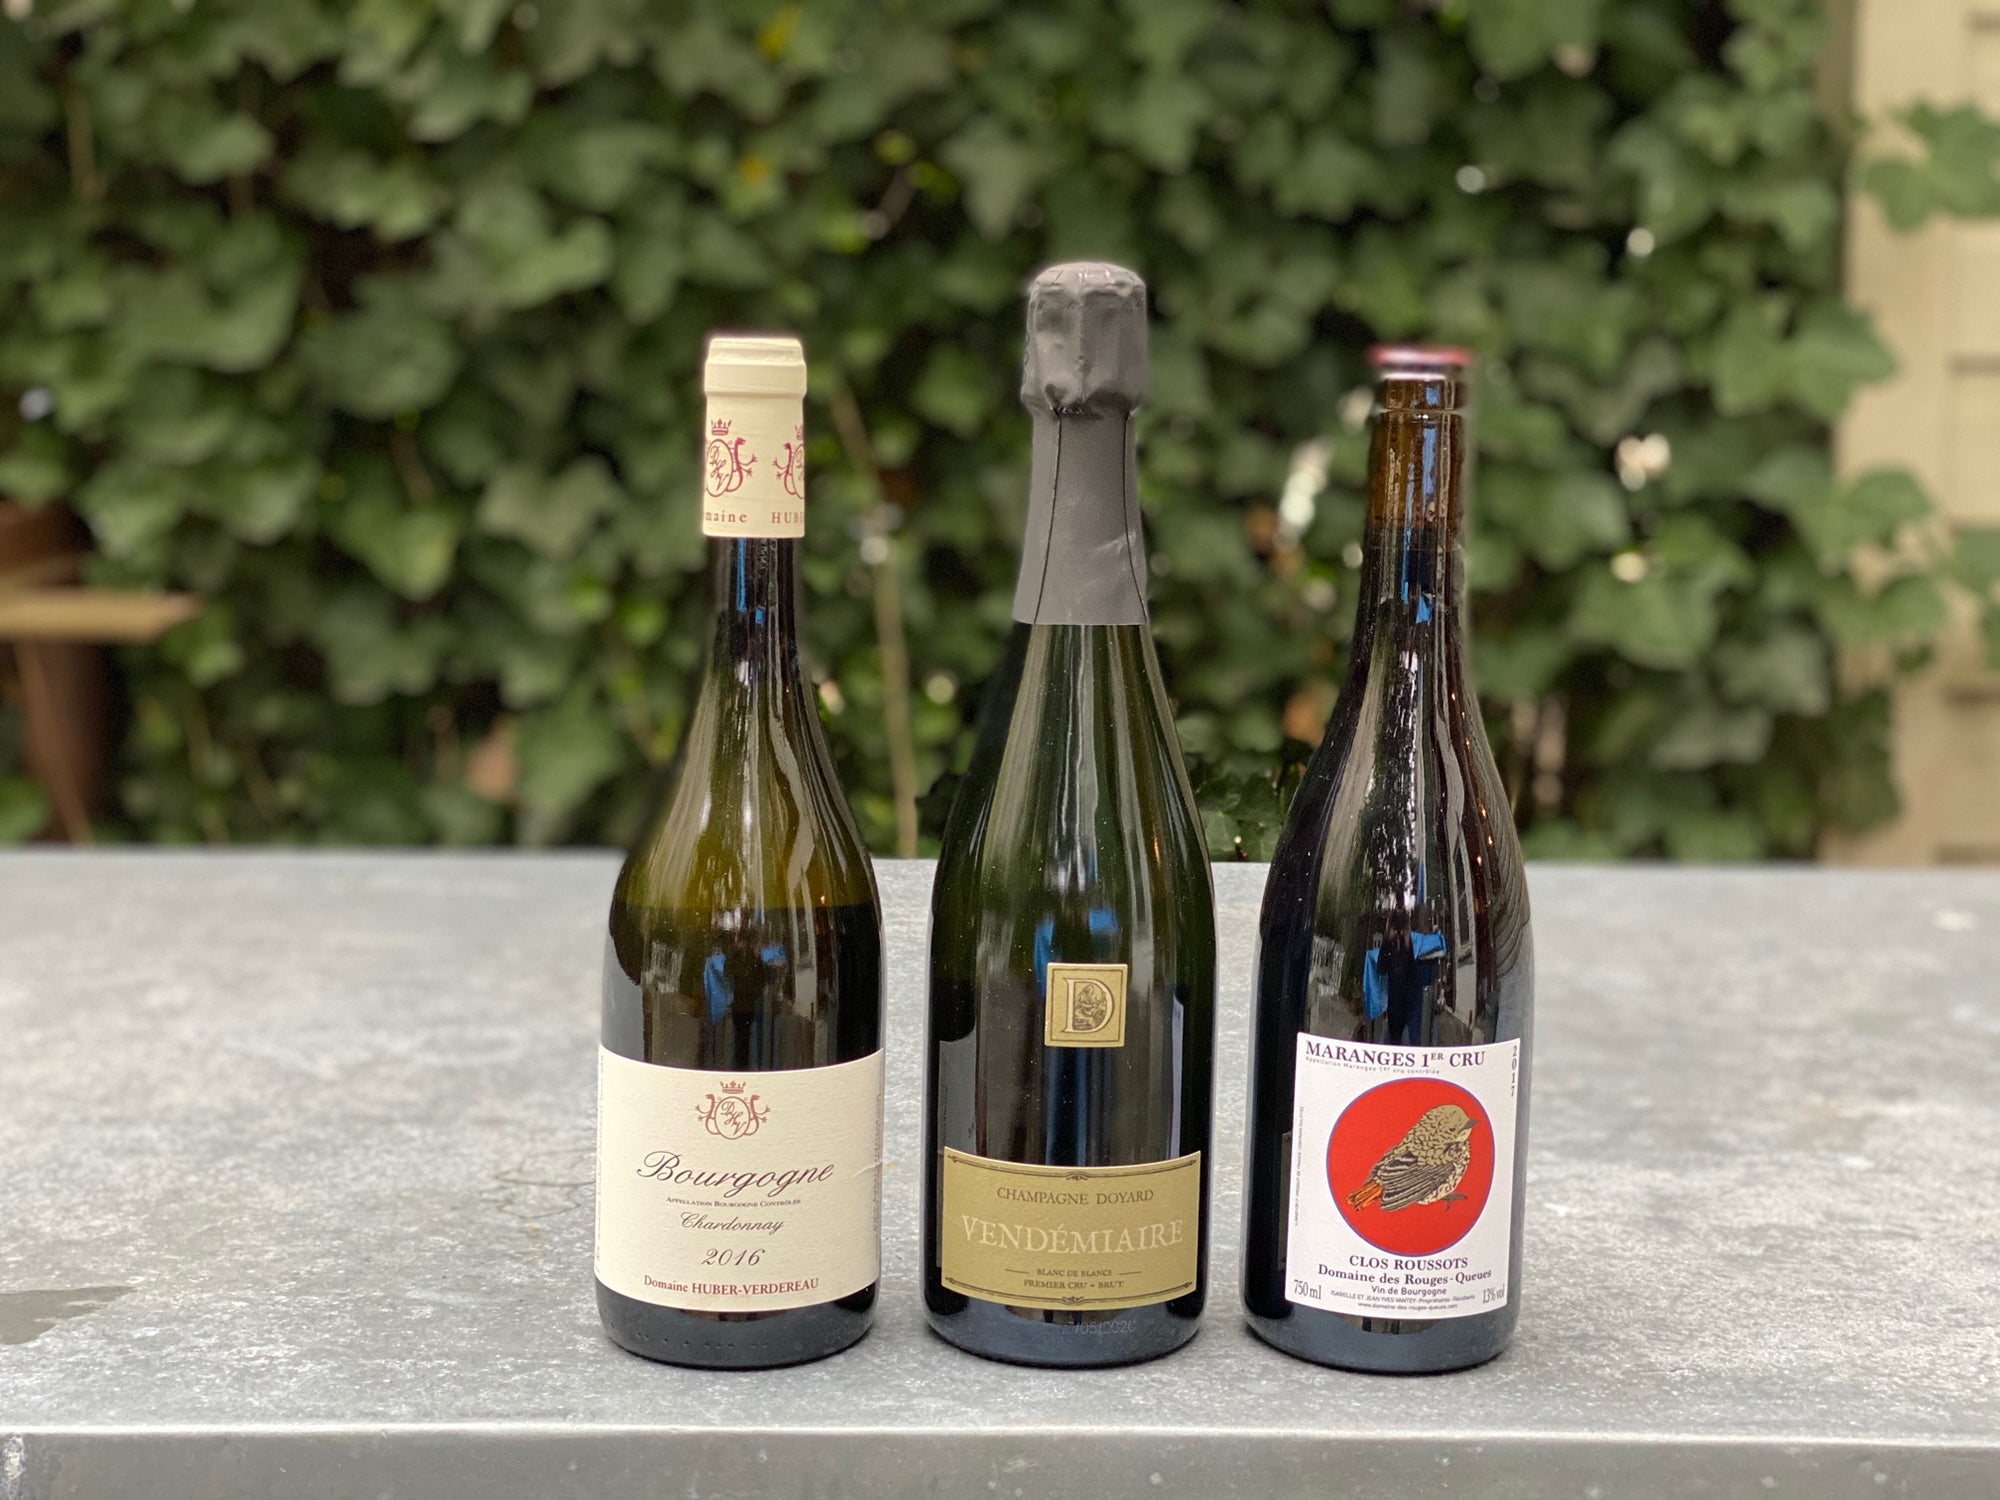 Domaine Huber-Verdereau, Mersault, Chardonnay, Champagne Doyard, Champagne, Grower Champagne, Organic Champagne, Burgundy, Pinot Noir, Domaine des Rouges-Queue, Natural Wine, Wine Delivery, Williamsburg Brooklyn, Wine Store